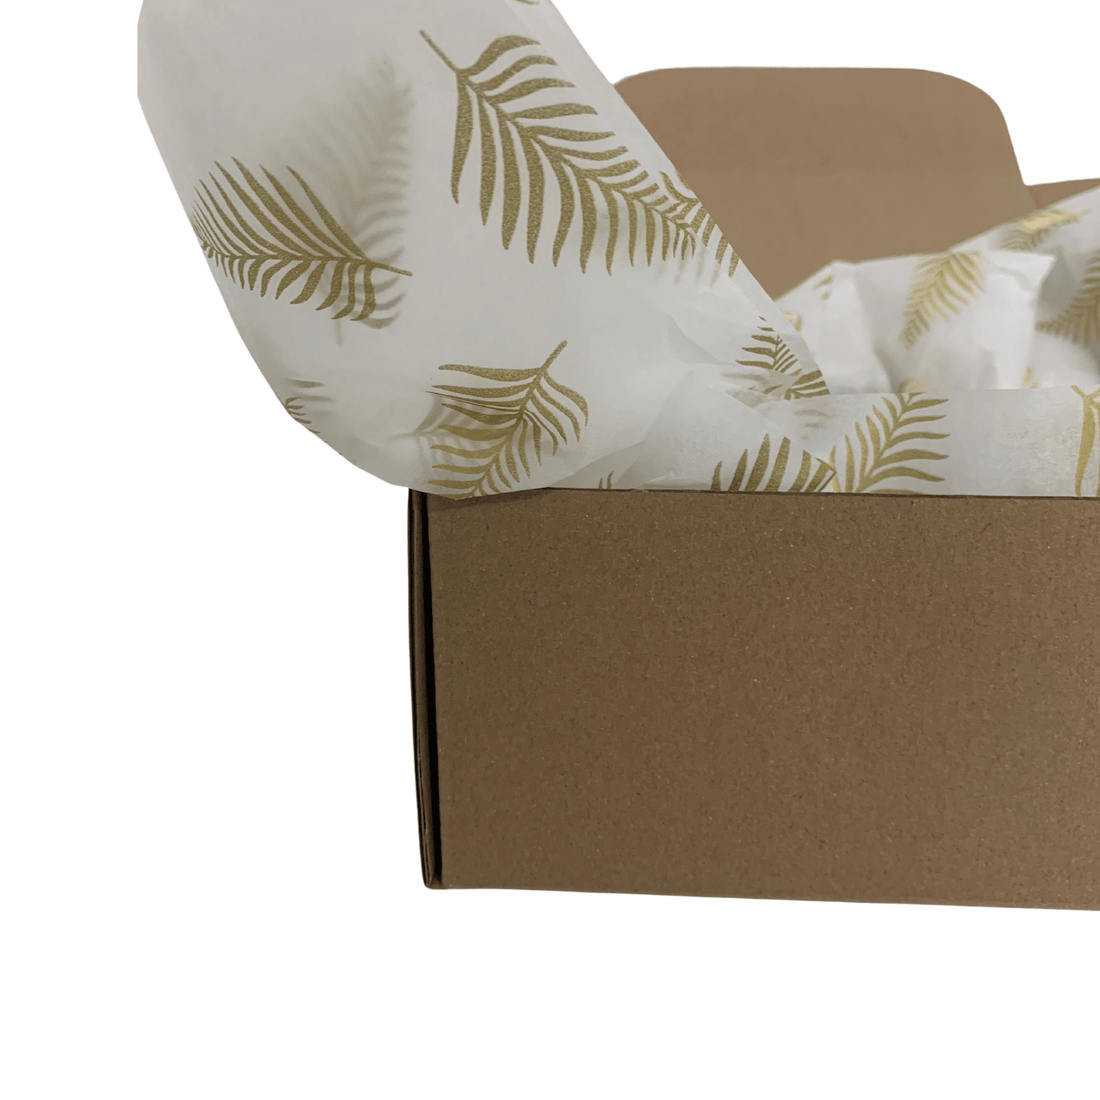 Palm Gold Printed Tissue Paper ( 5 pack ) - Happy Box